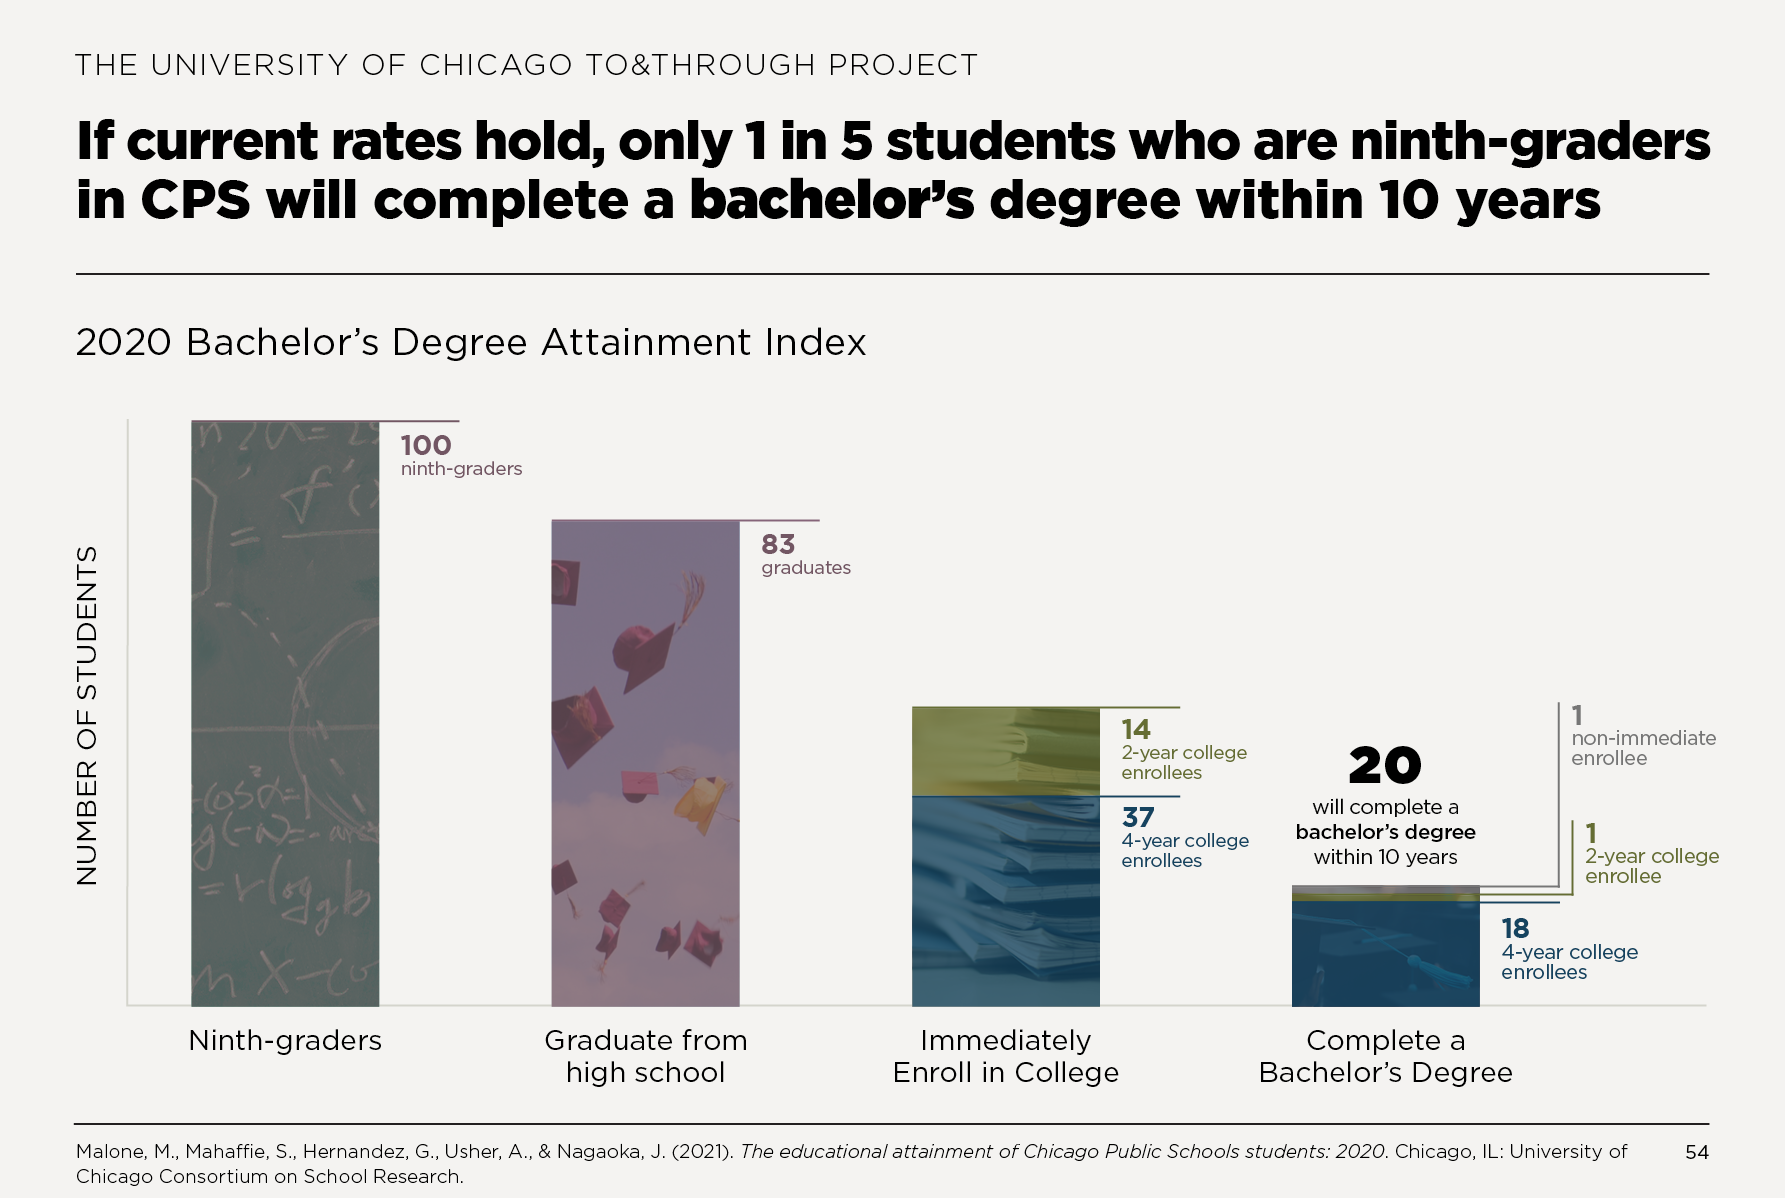 If current rates hold, only 1 in 5 students who are ninth-graders in CPS will complete a bachelor’s degree within 10 years